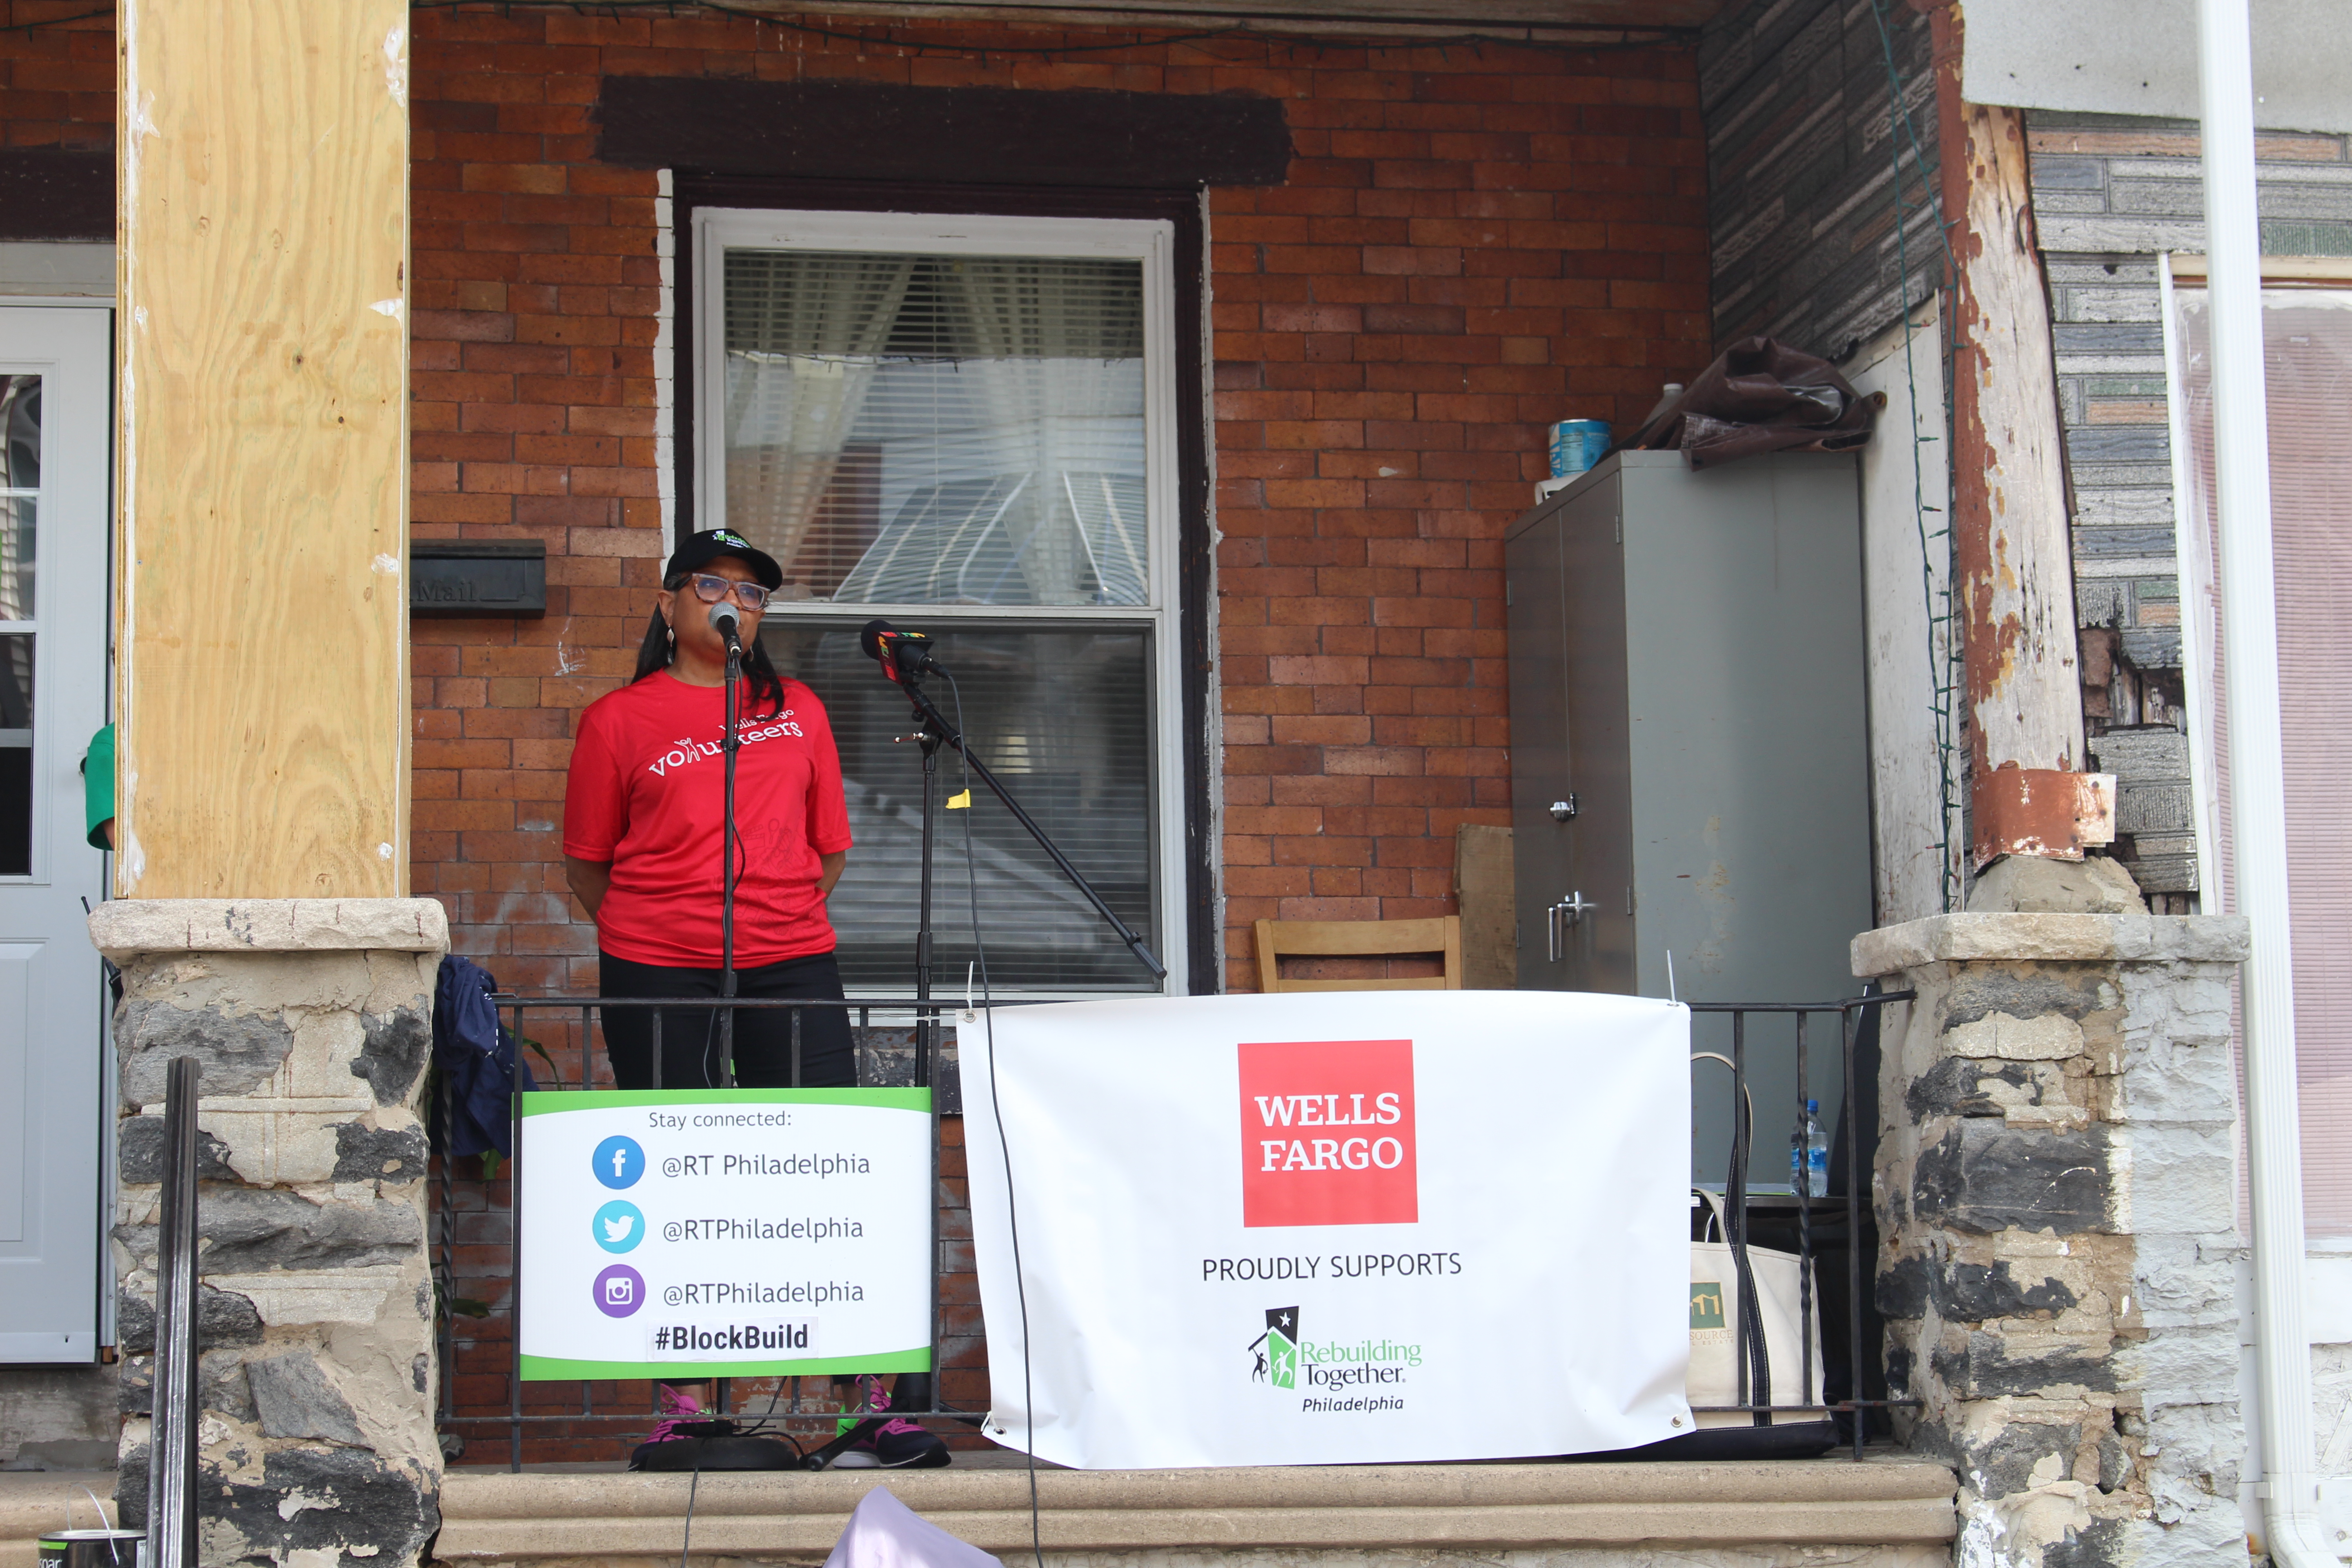 Connie Wright notes that Wells Fargo is looking to address housing affordability. Photo: Jensen Toussaint/AL DÍA News. 